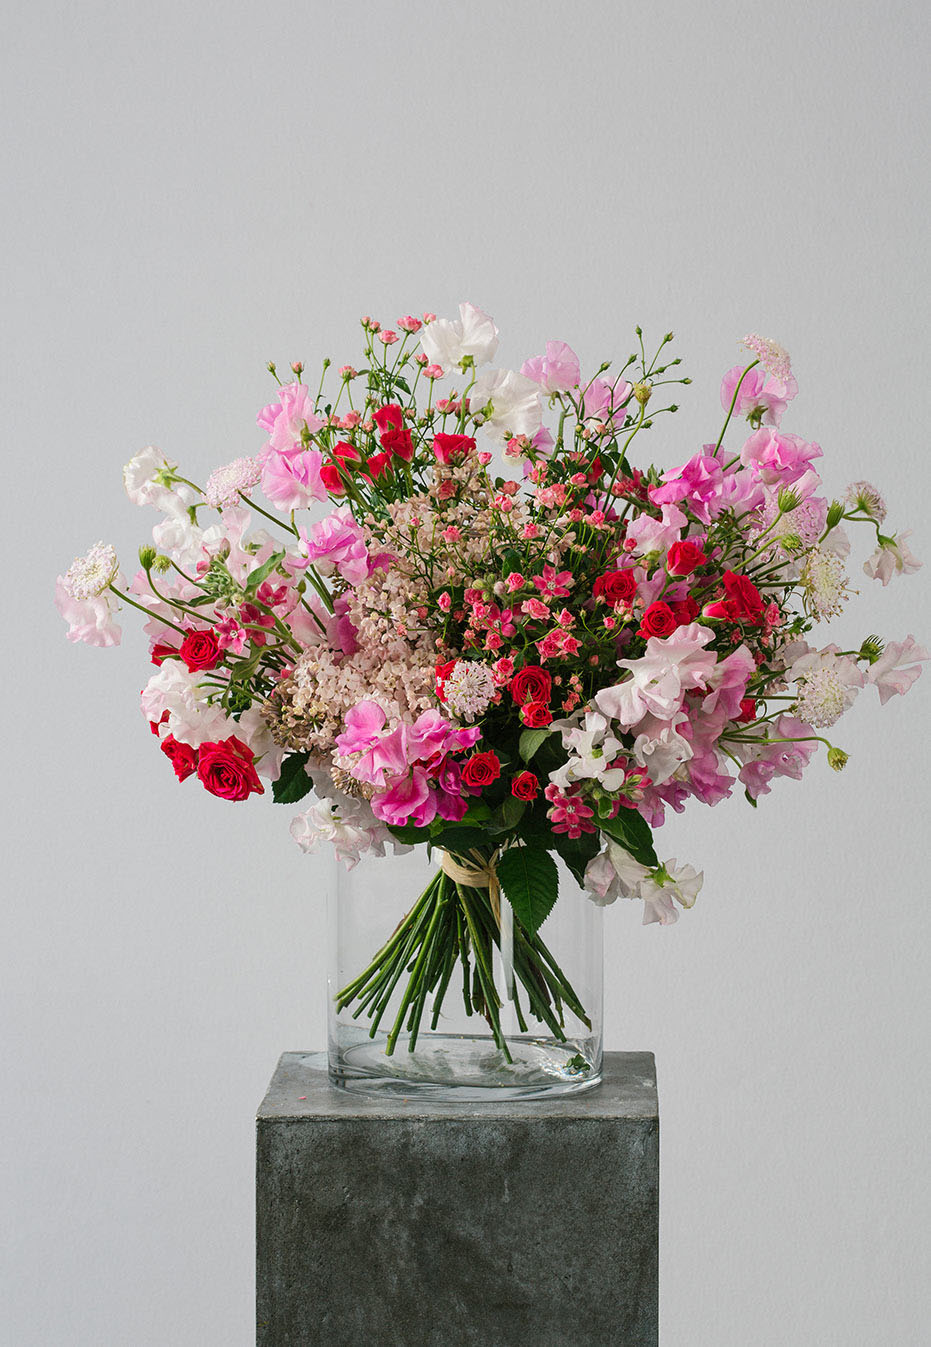 flower bouquet of rose and sweet peas by flannel flowers